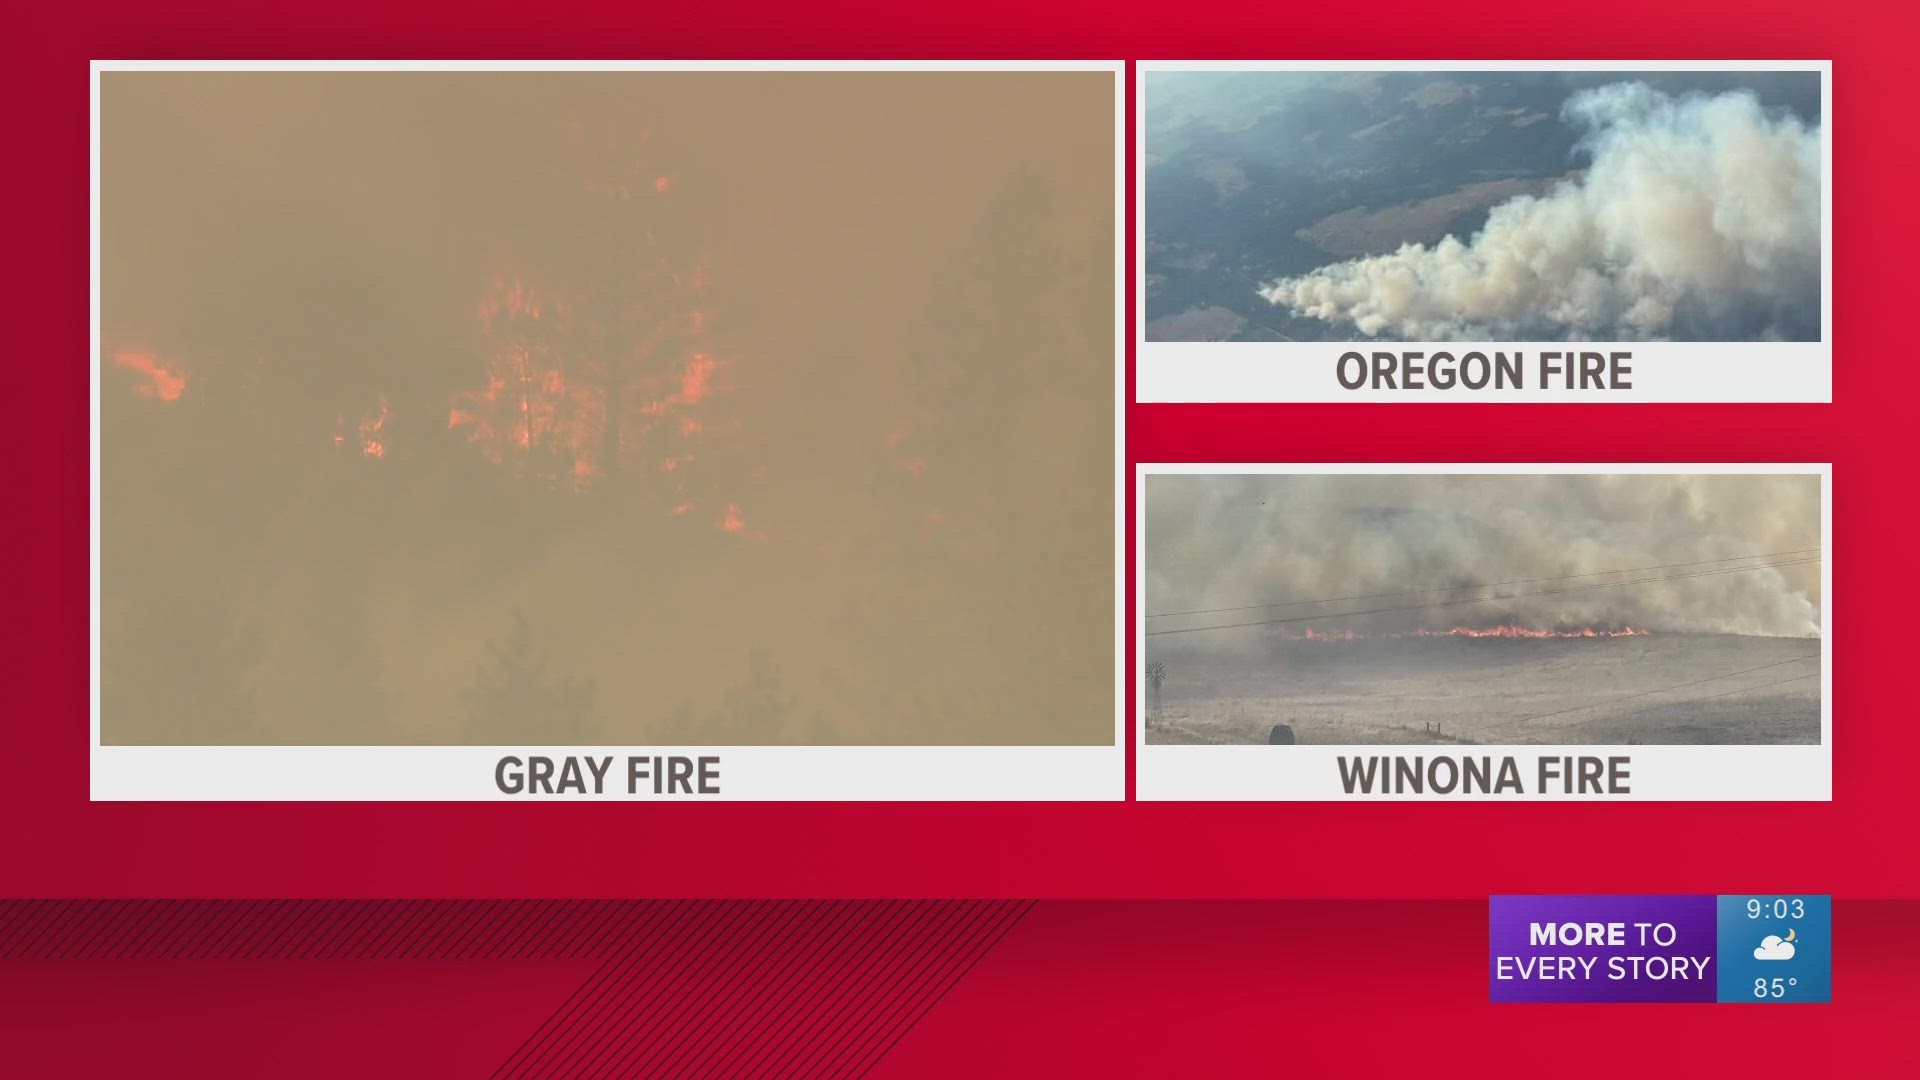 The Gray Fire, Oregon Fire and a fire in Winona are prompting major evacuations Friday night. Here is what we know as of 9 p.m.